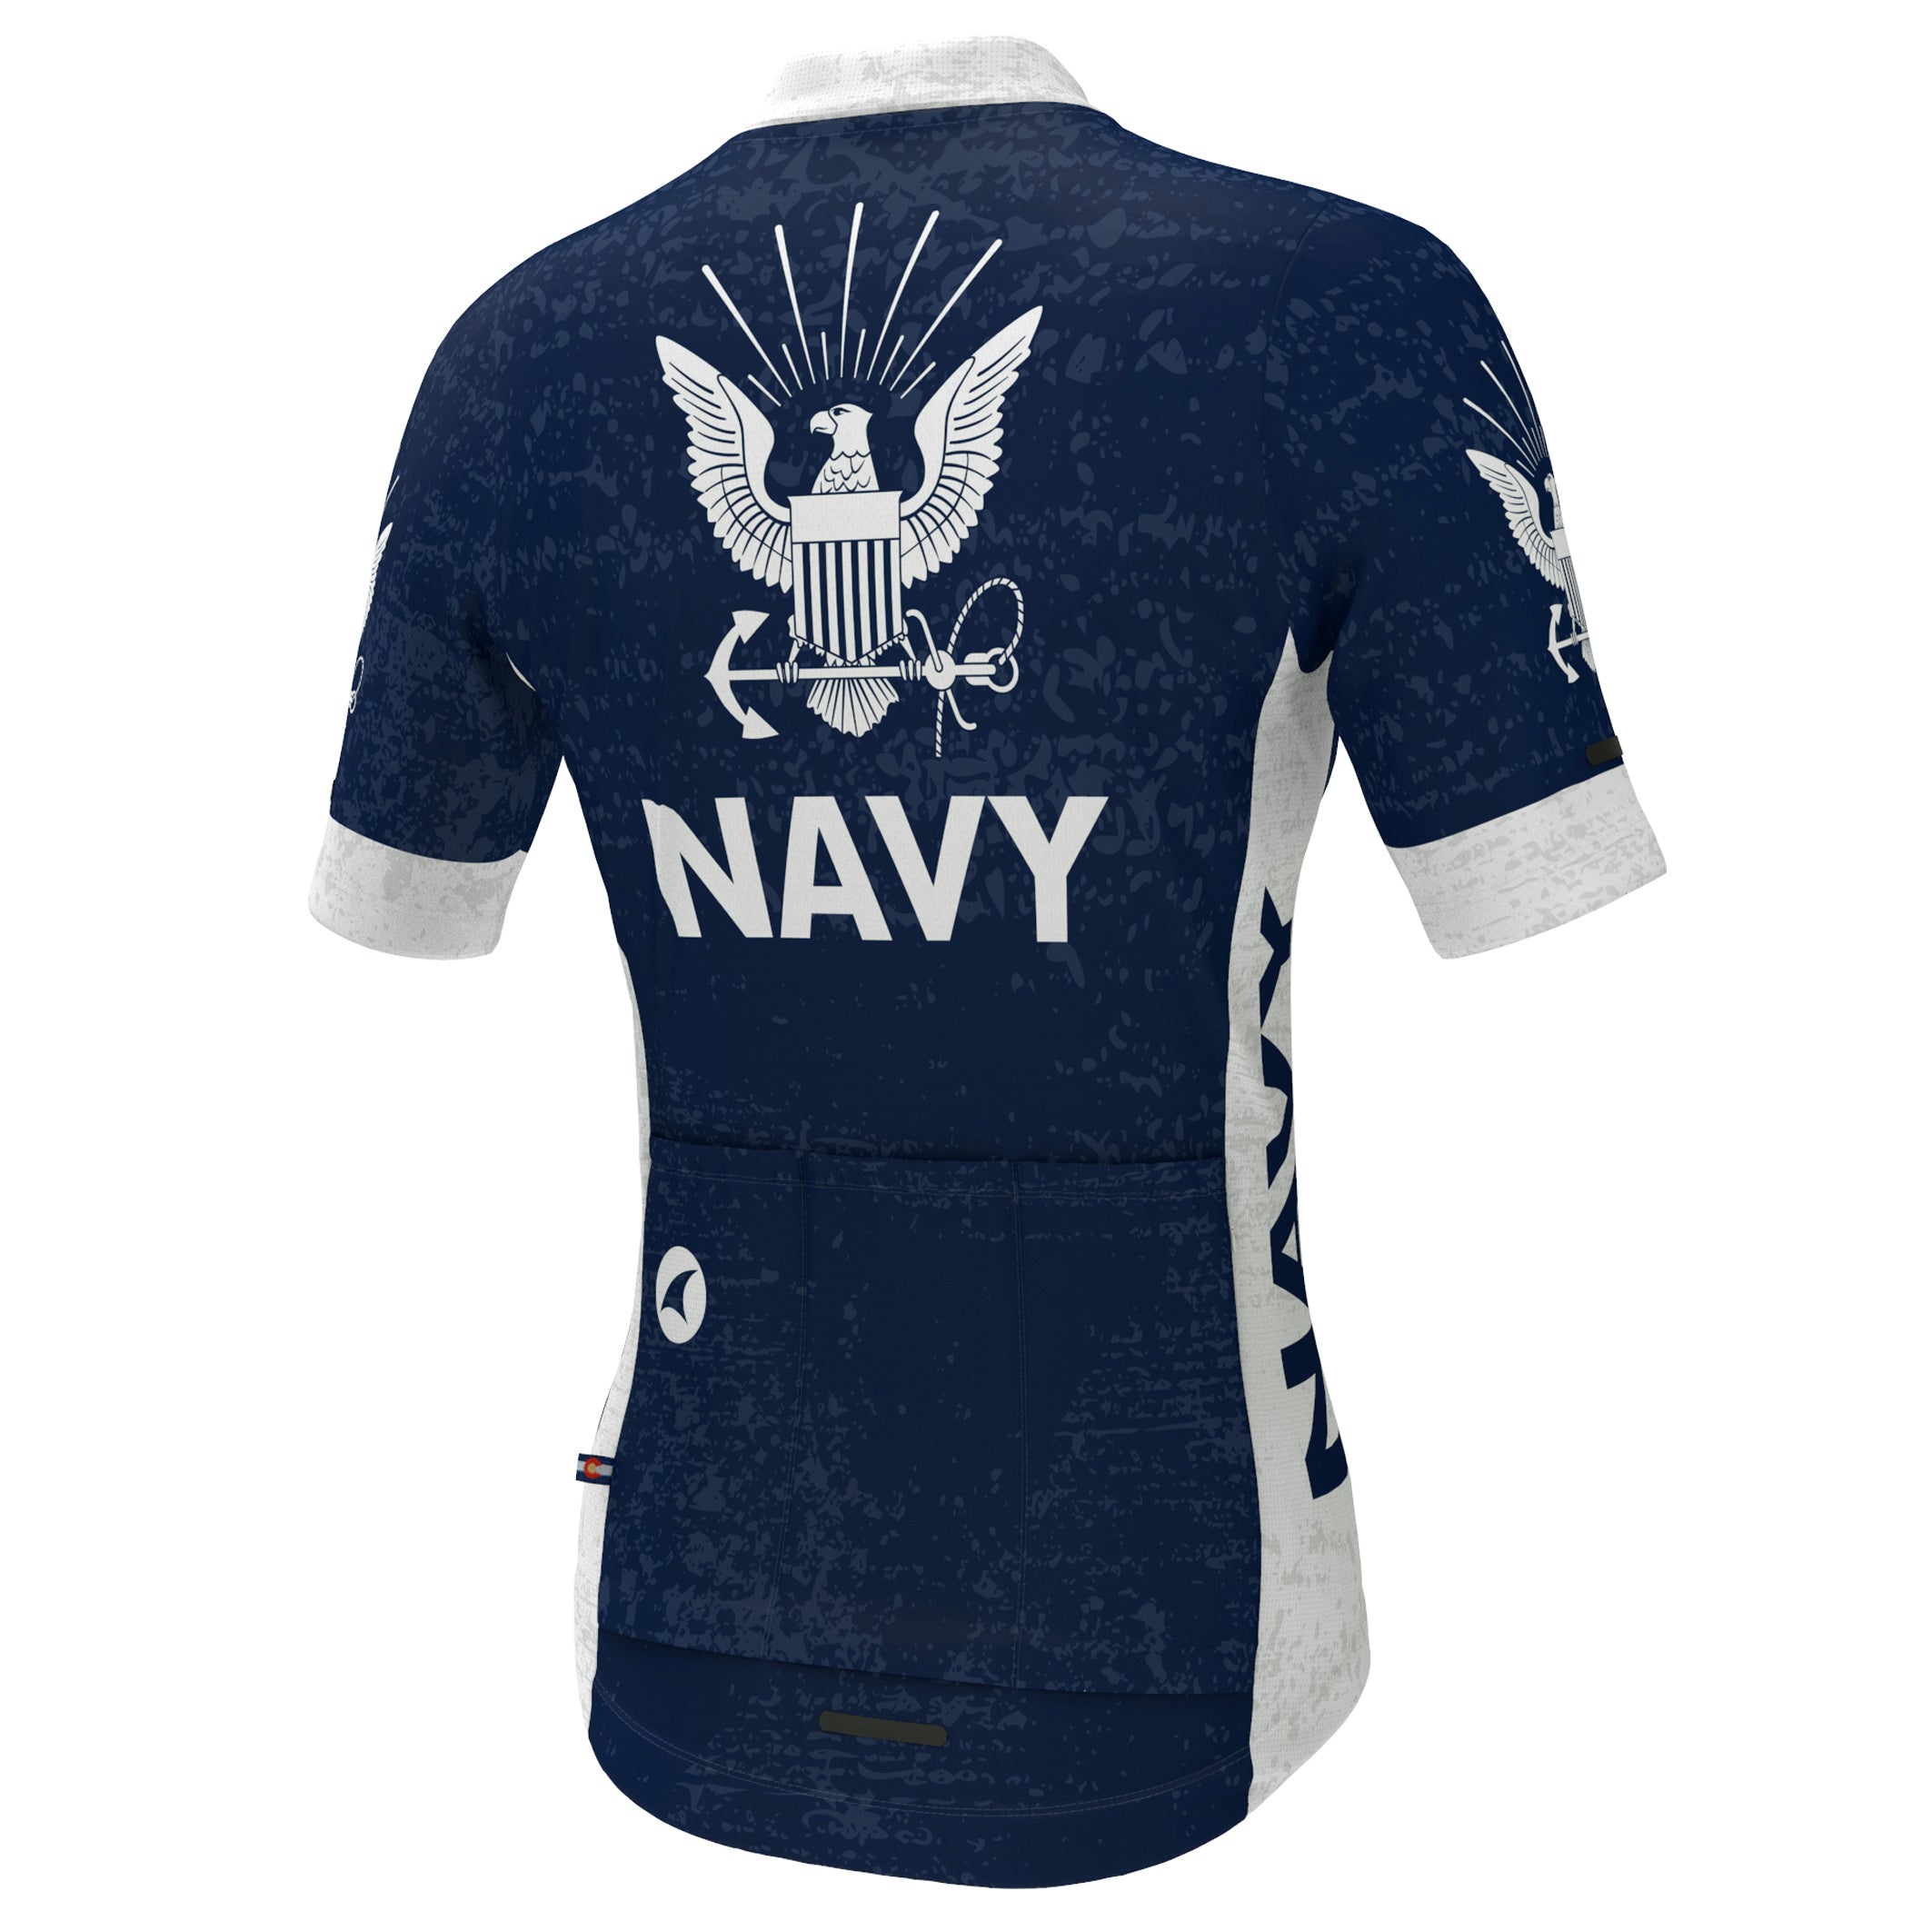 US Navy Cycling Jersey for Women - Pactimo